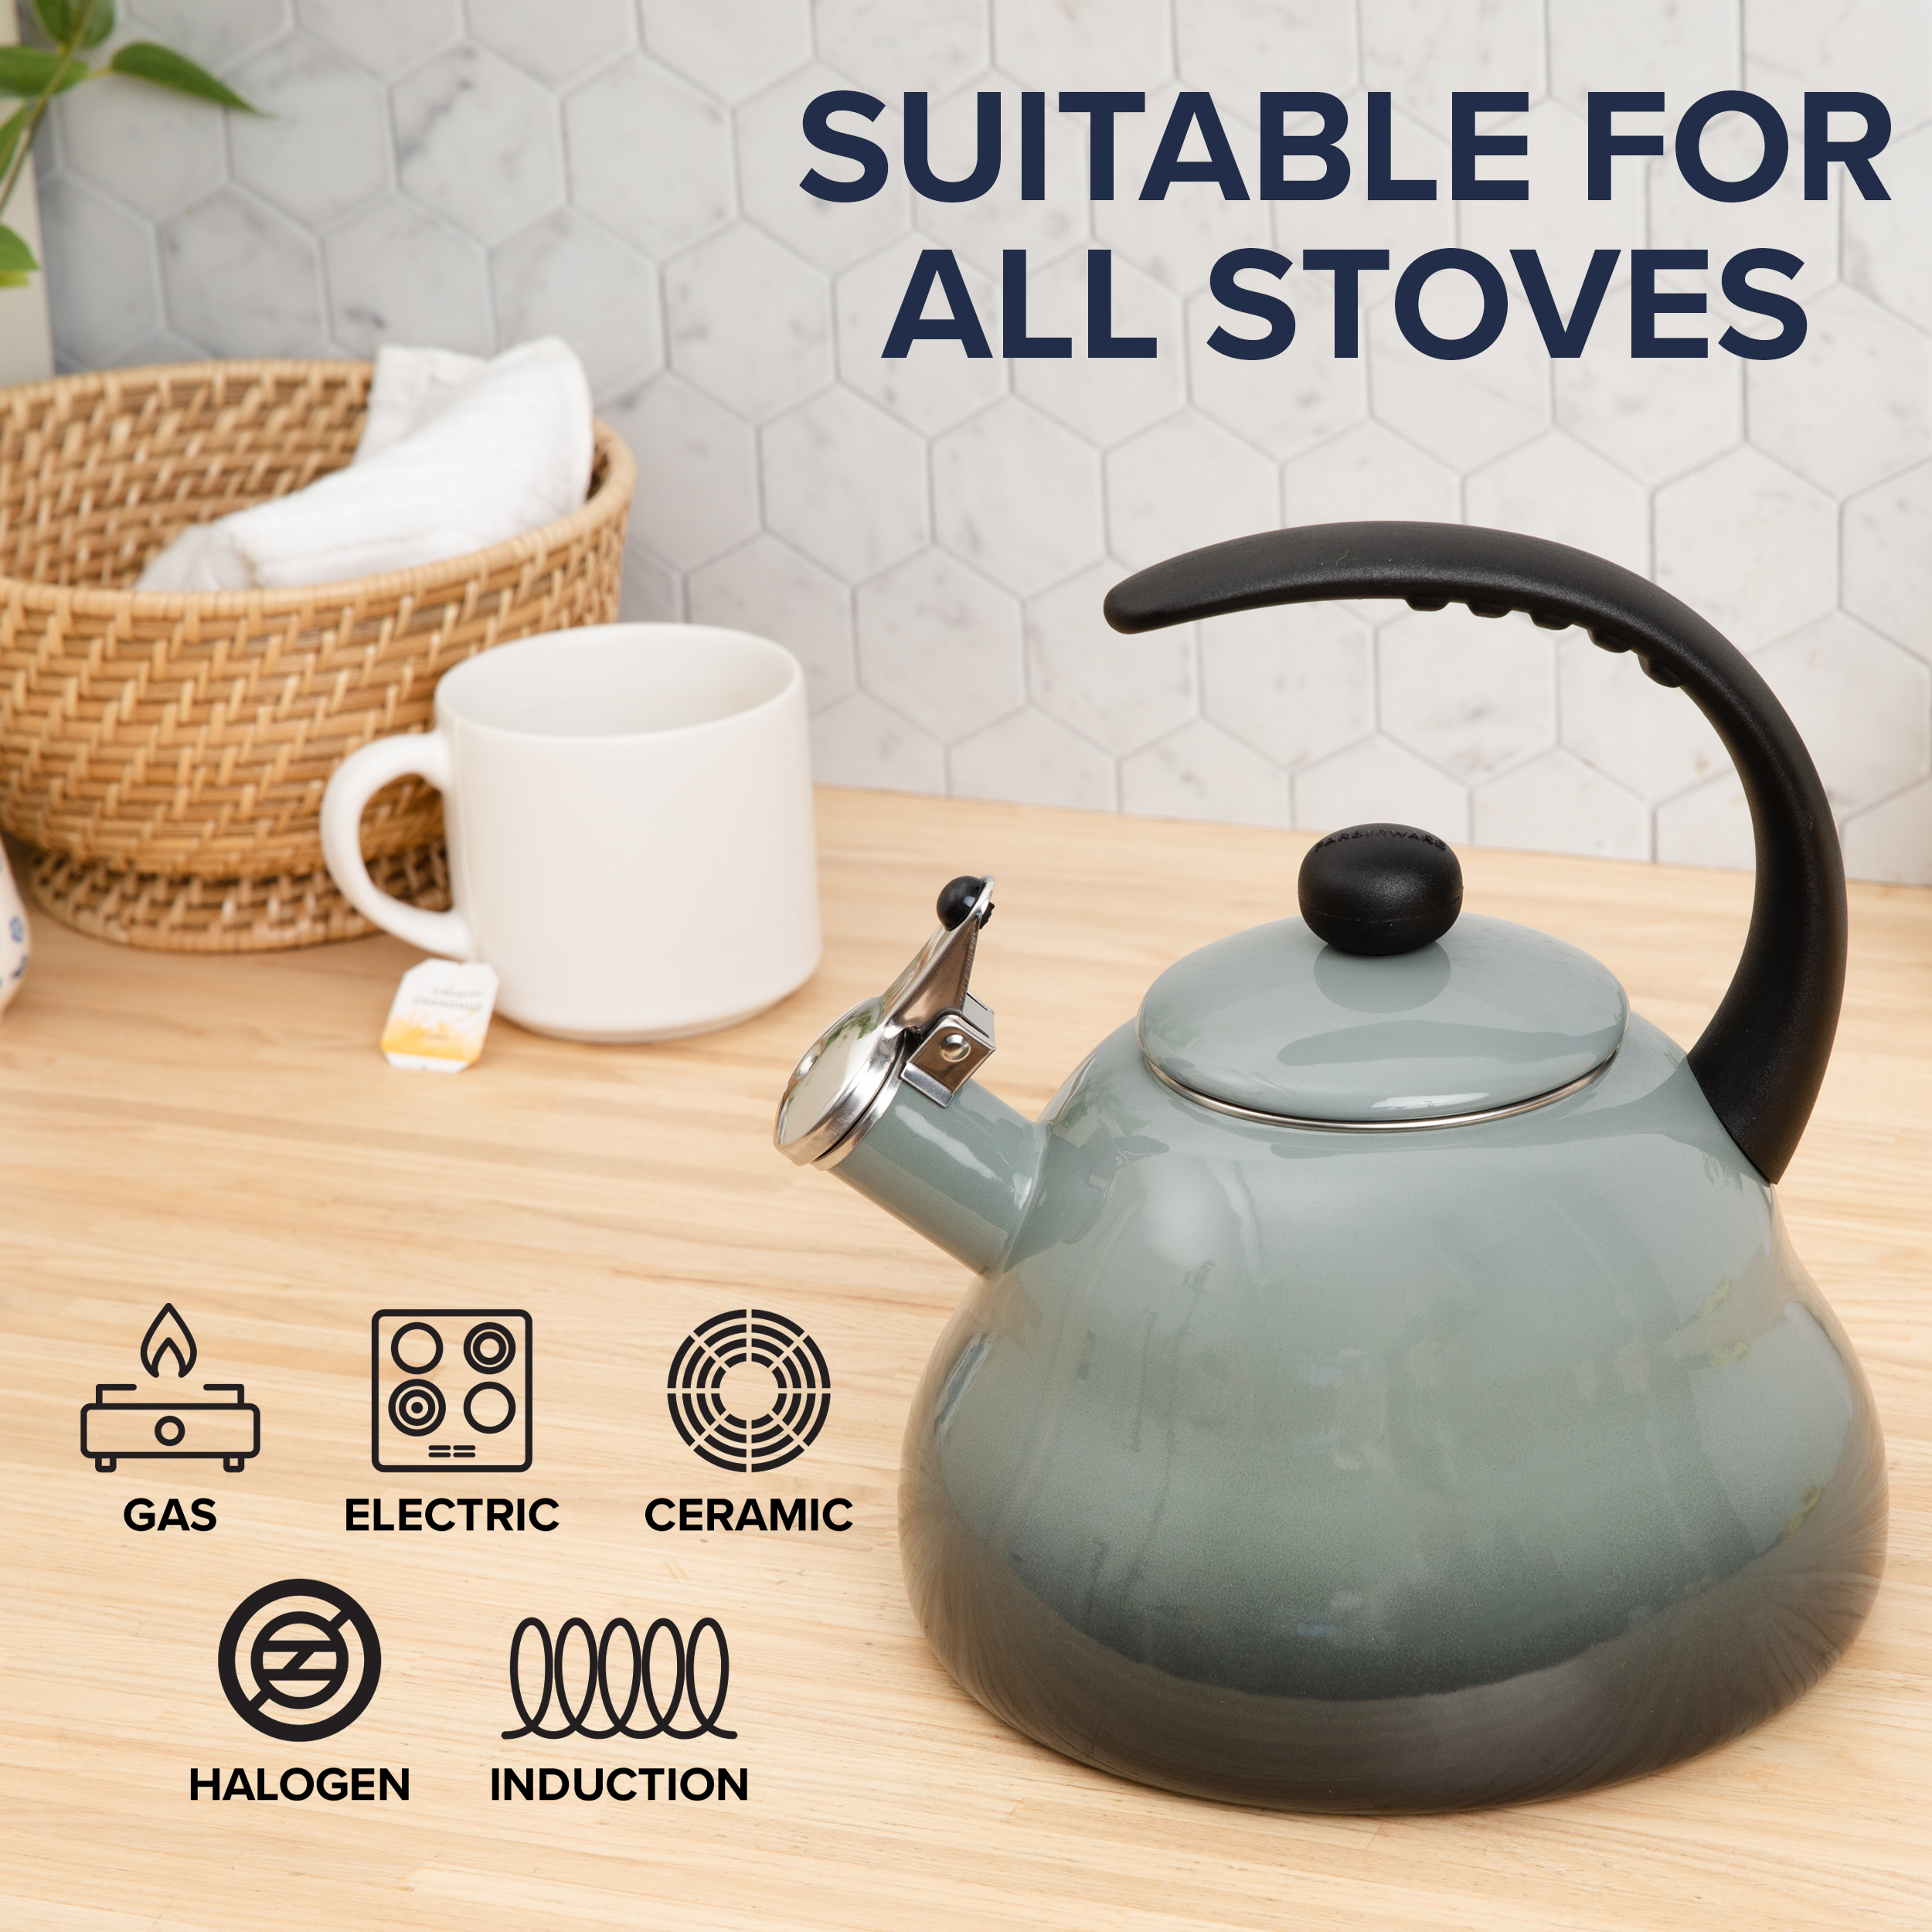 Farberware 9.2-Cups Stainless Steel Induction Tea Kettle with Pour